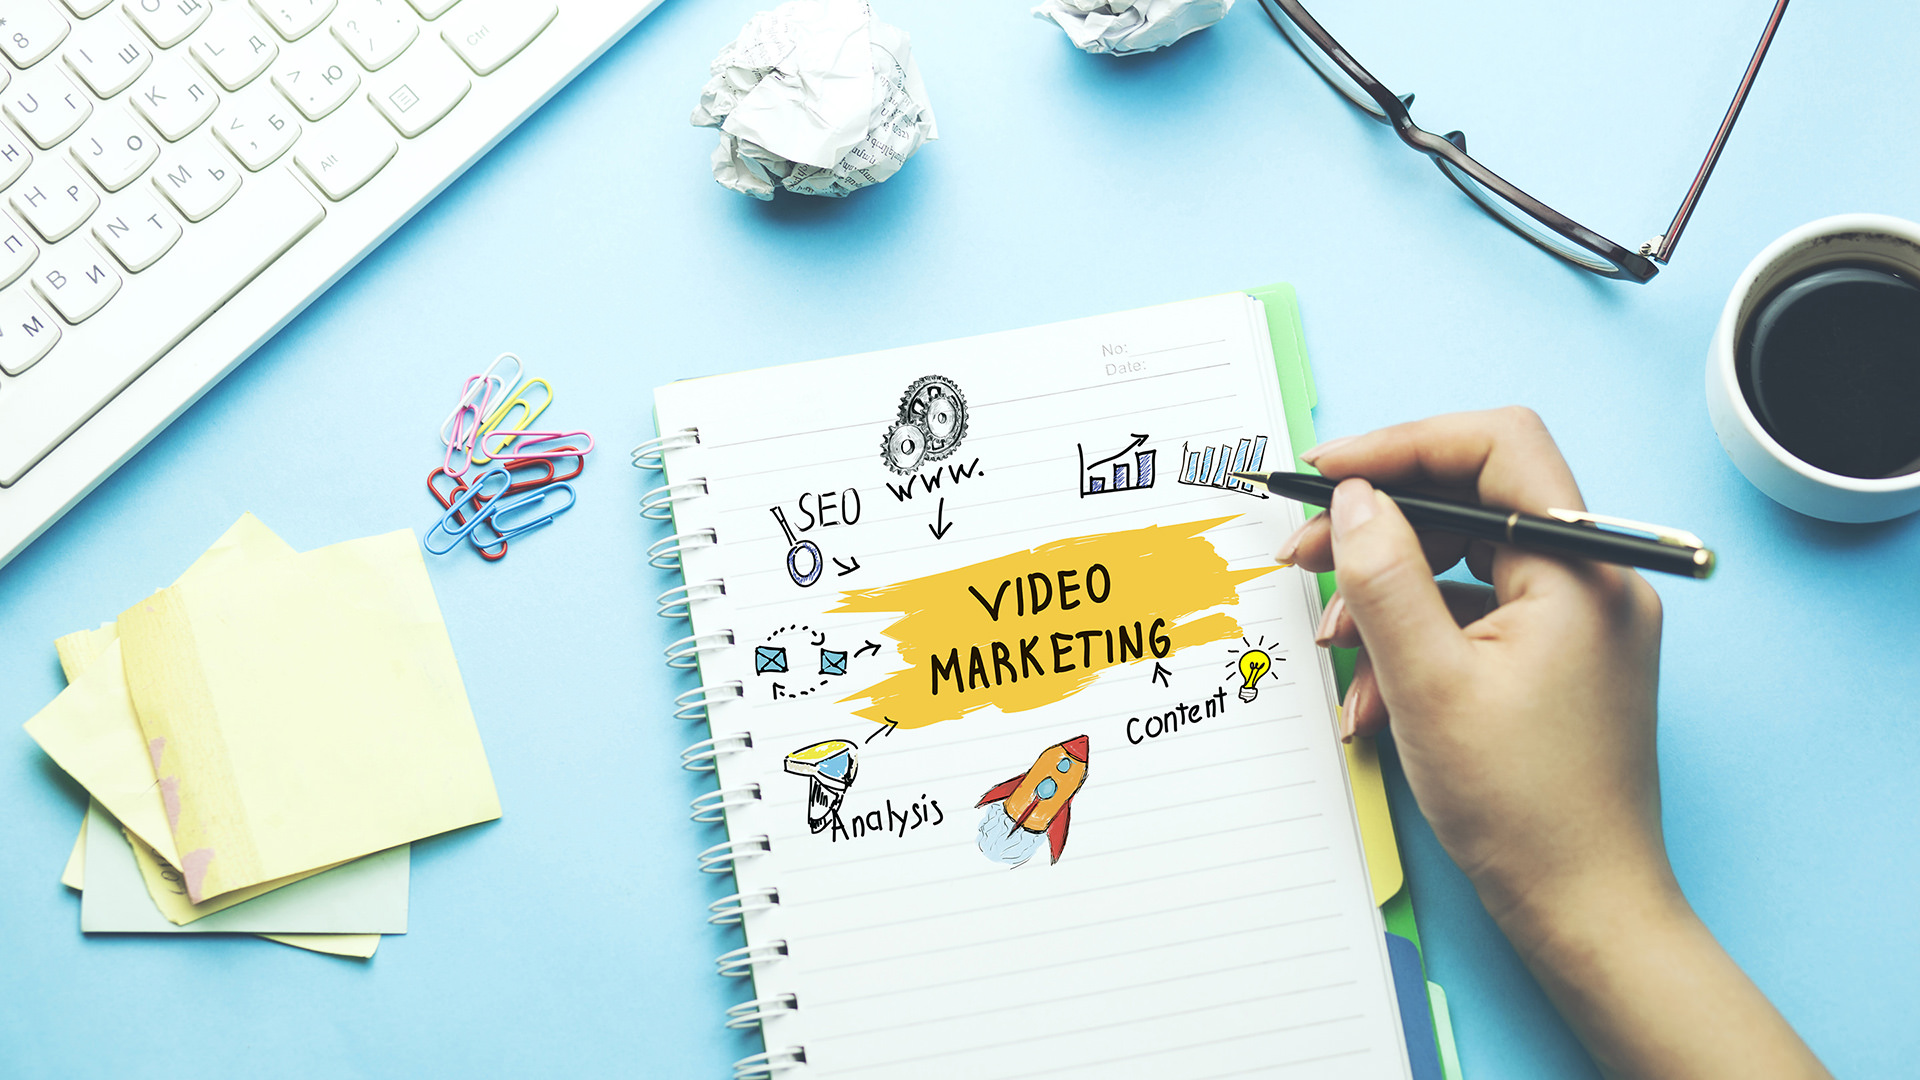 What Kinds Of Video Do Good For Video Marketing?